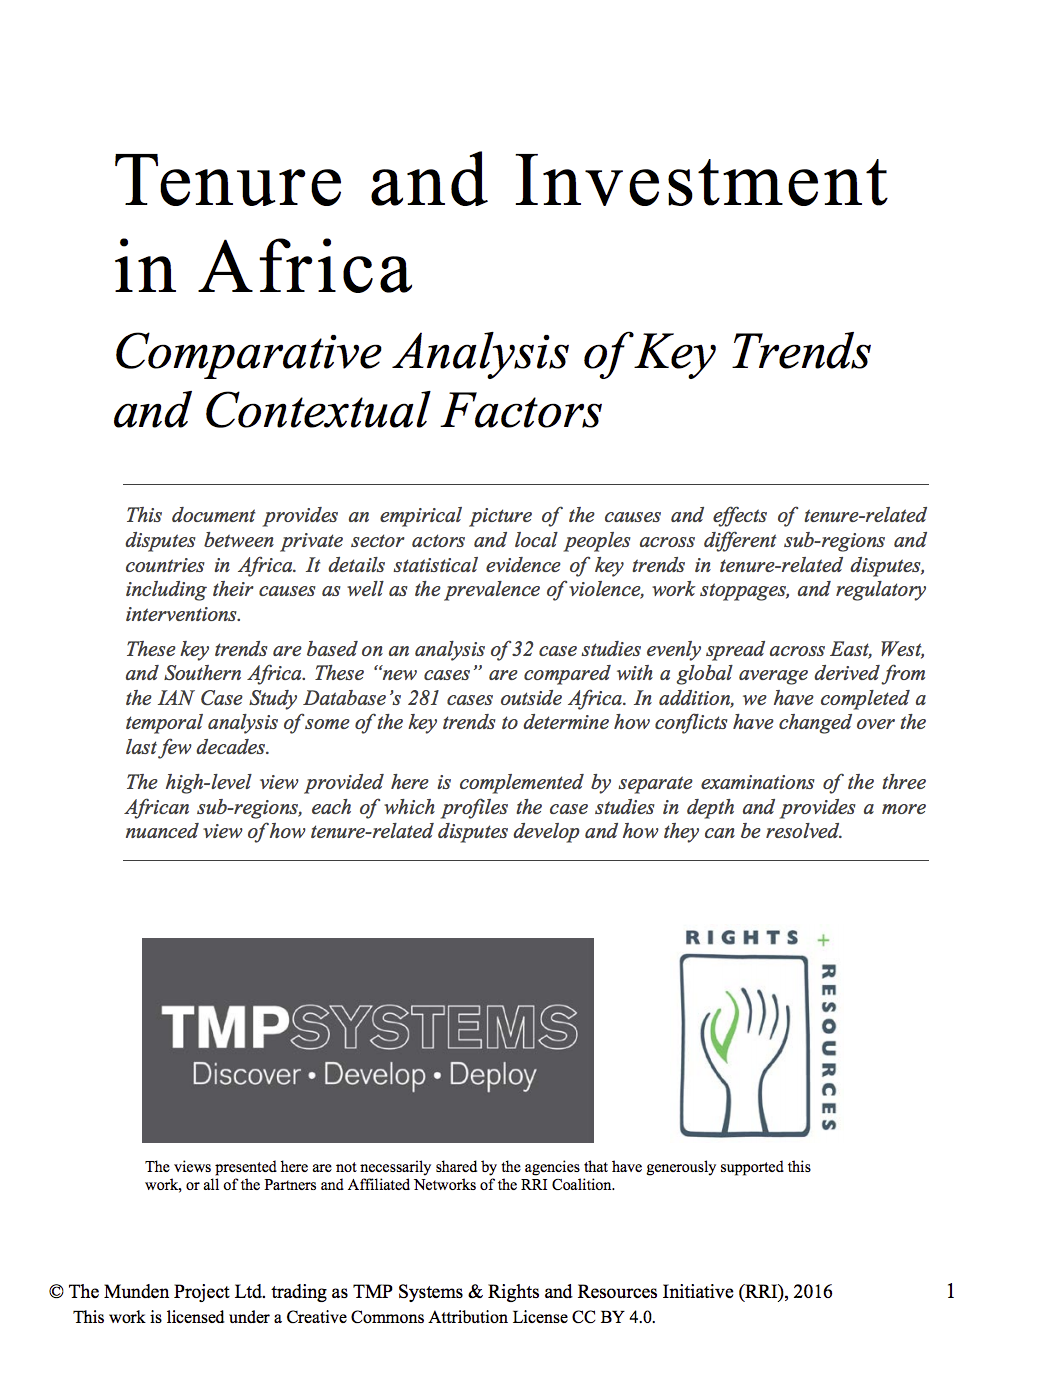 Tenure and Investment in Africa cover image